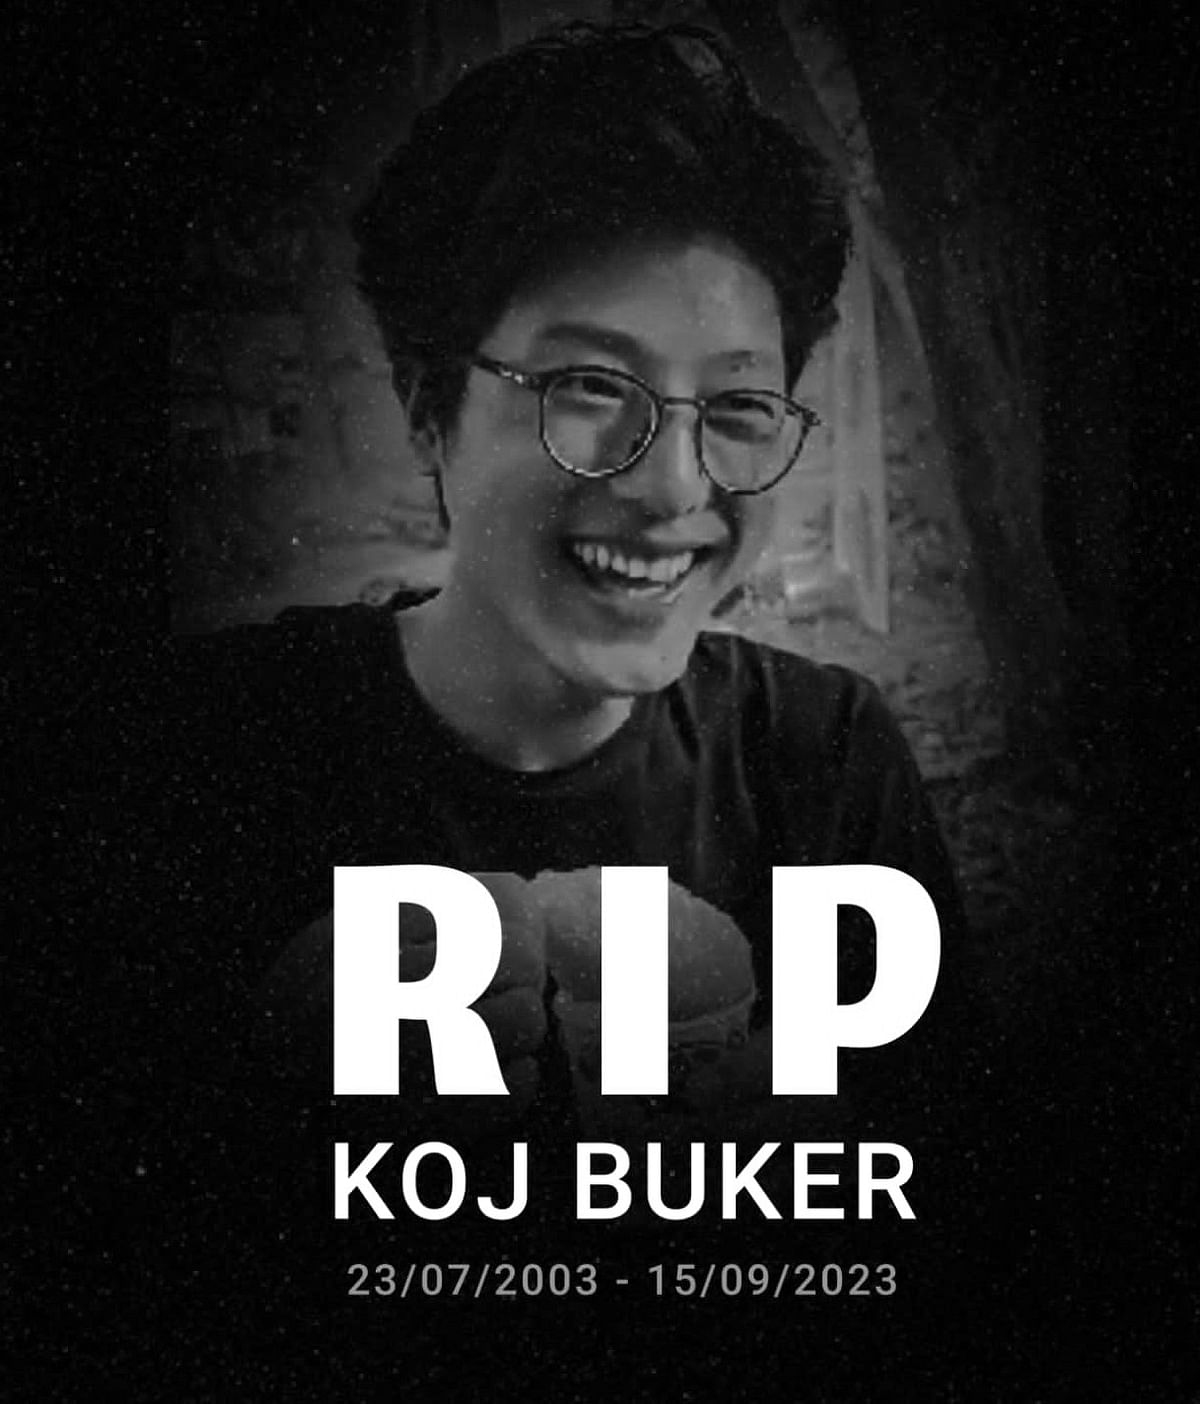 According to Koj Buker's friends, he wasn't able to clear his first-year exams due to internet issues.